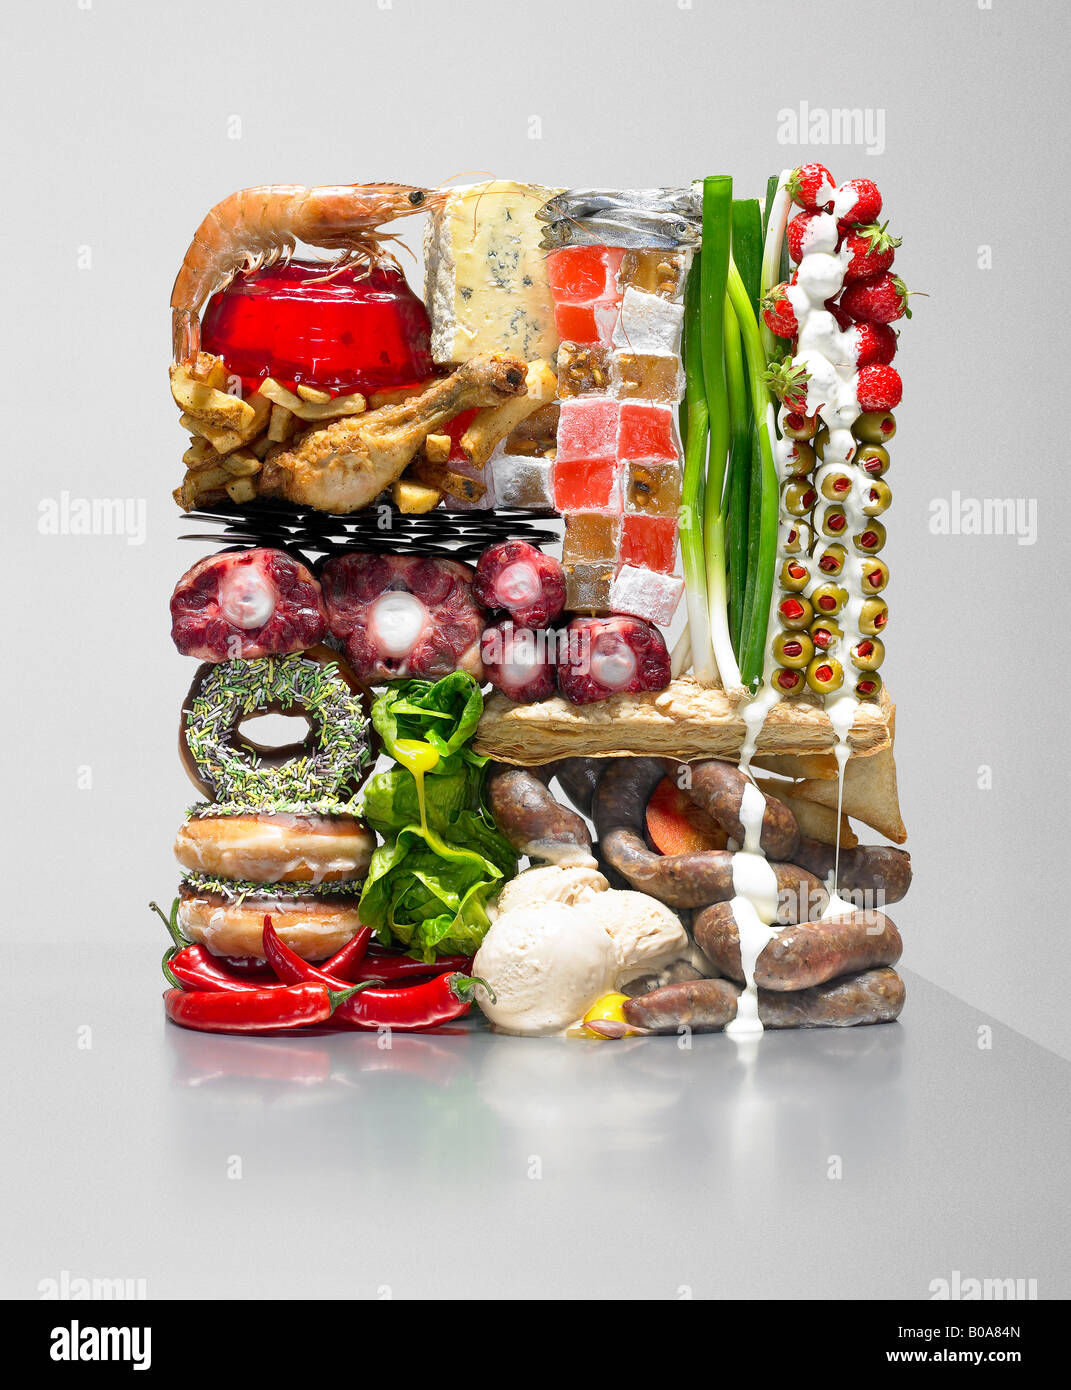 disgusting food pile gluttony over eating Stock Photo